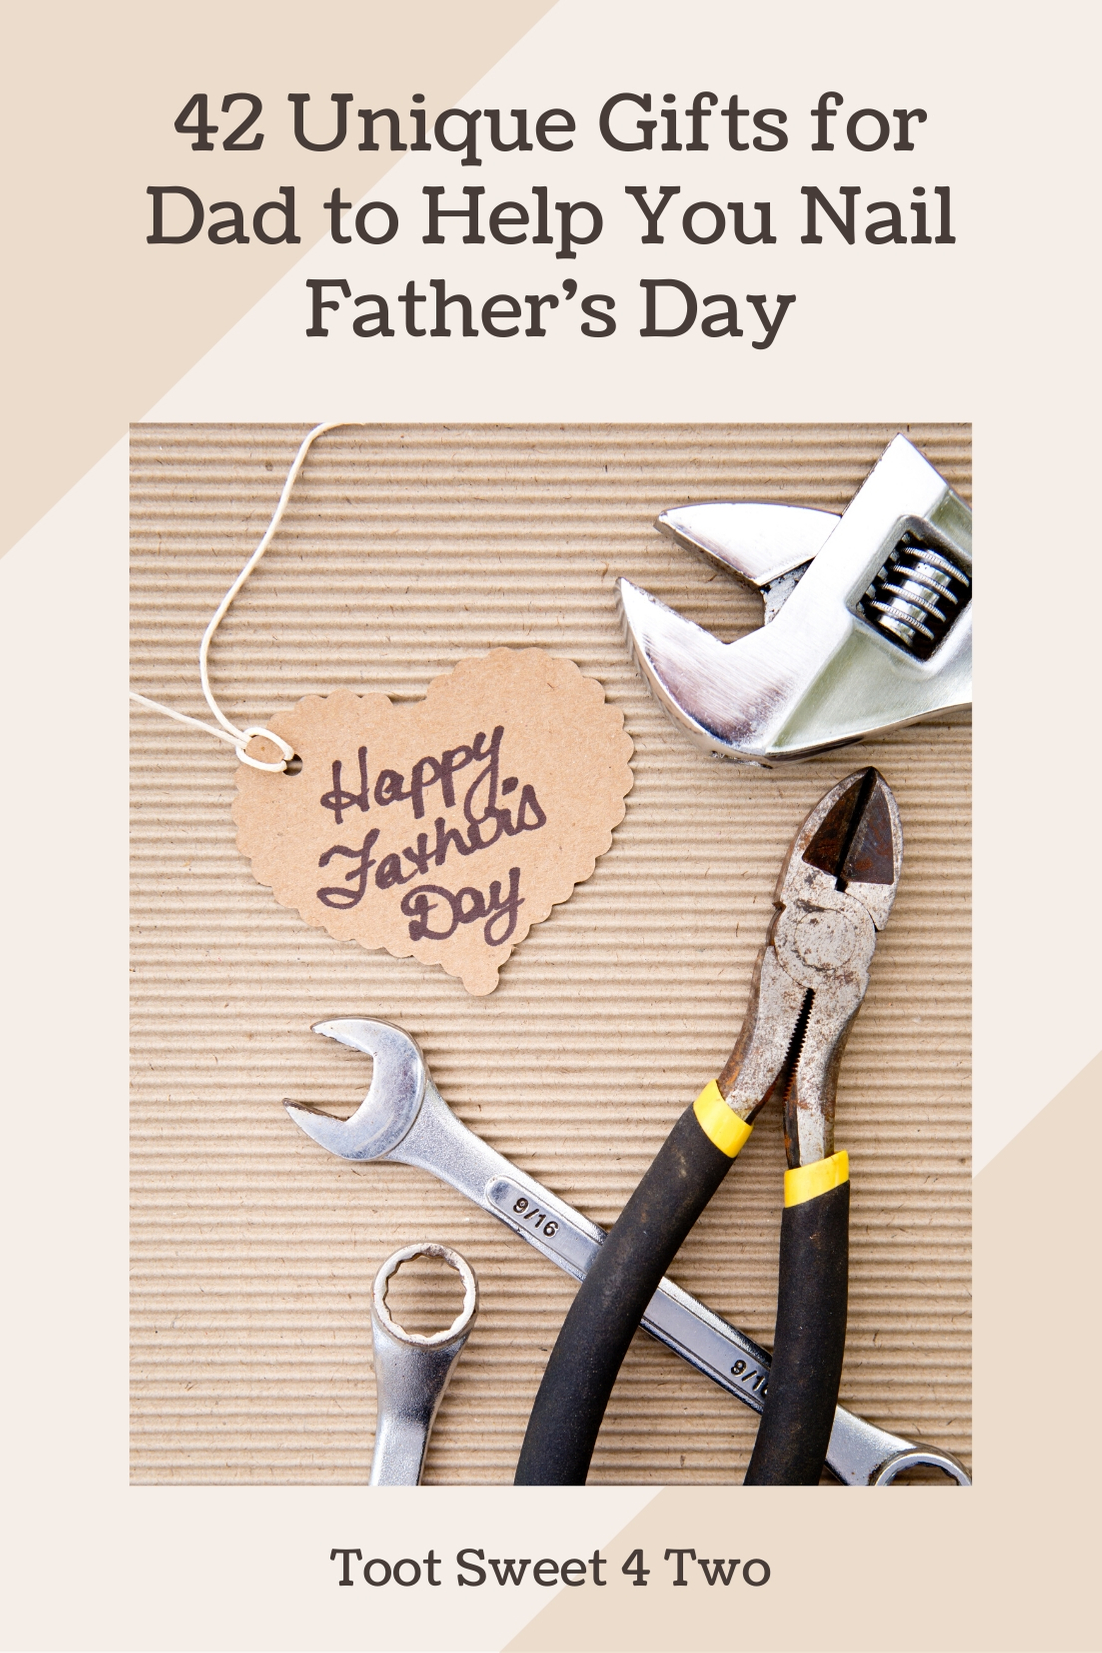 42 Unique Gifts for Dad Pinterest Cover Photo